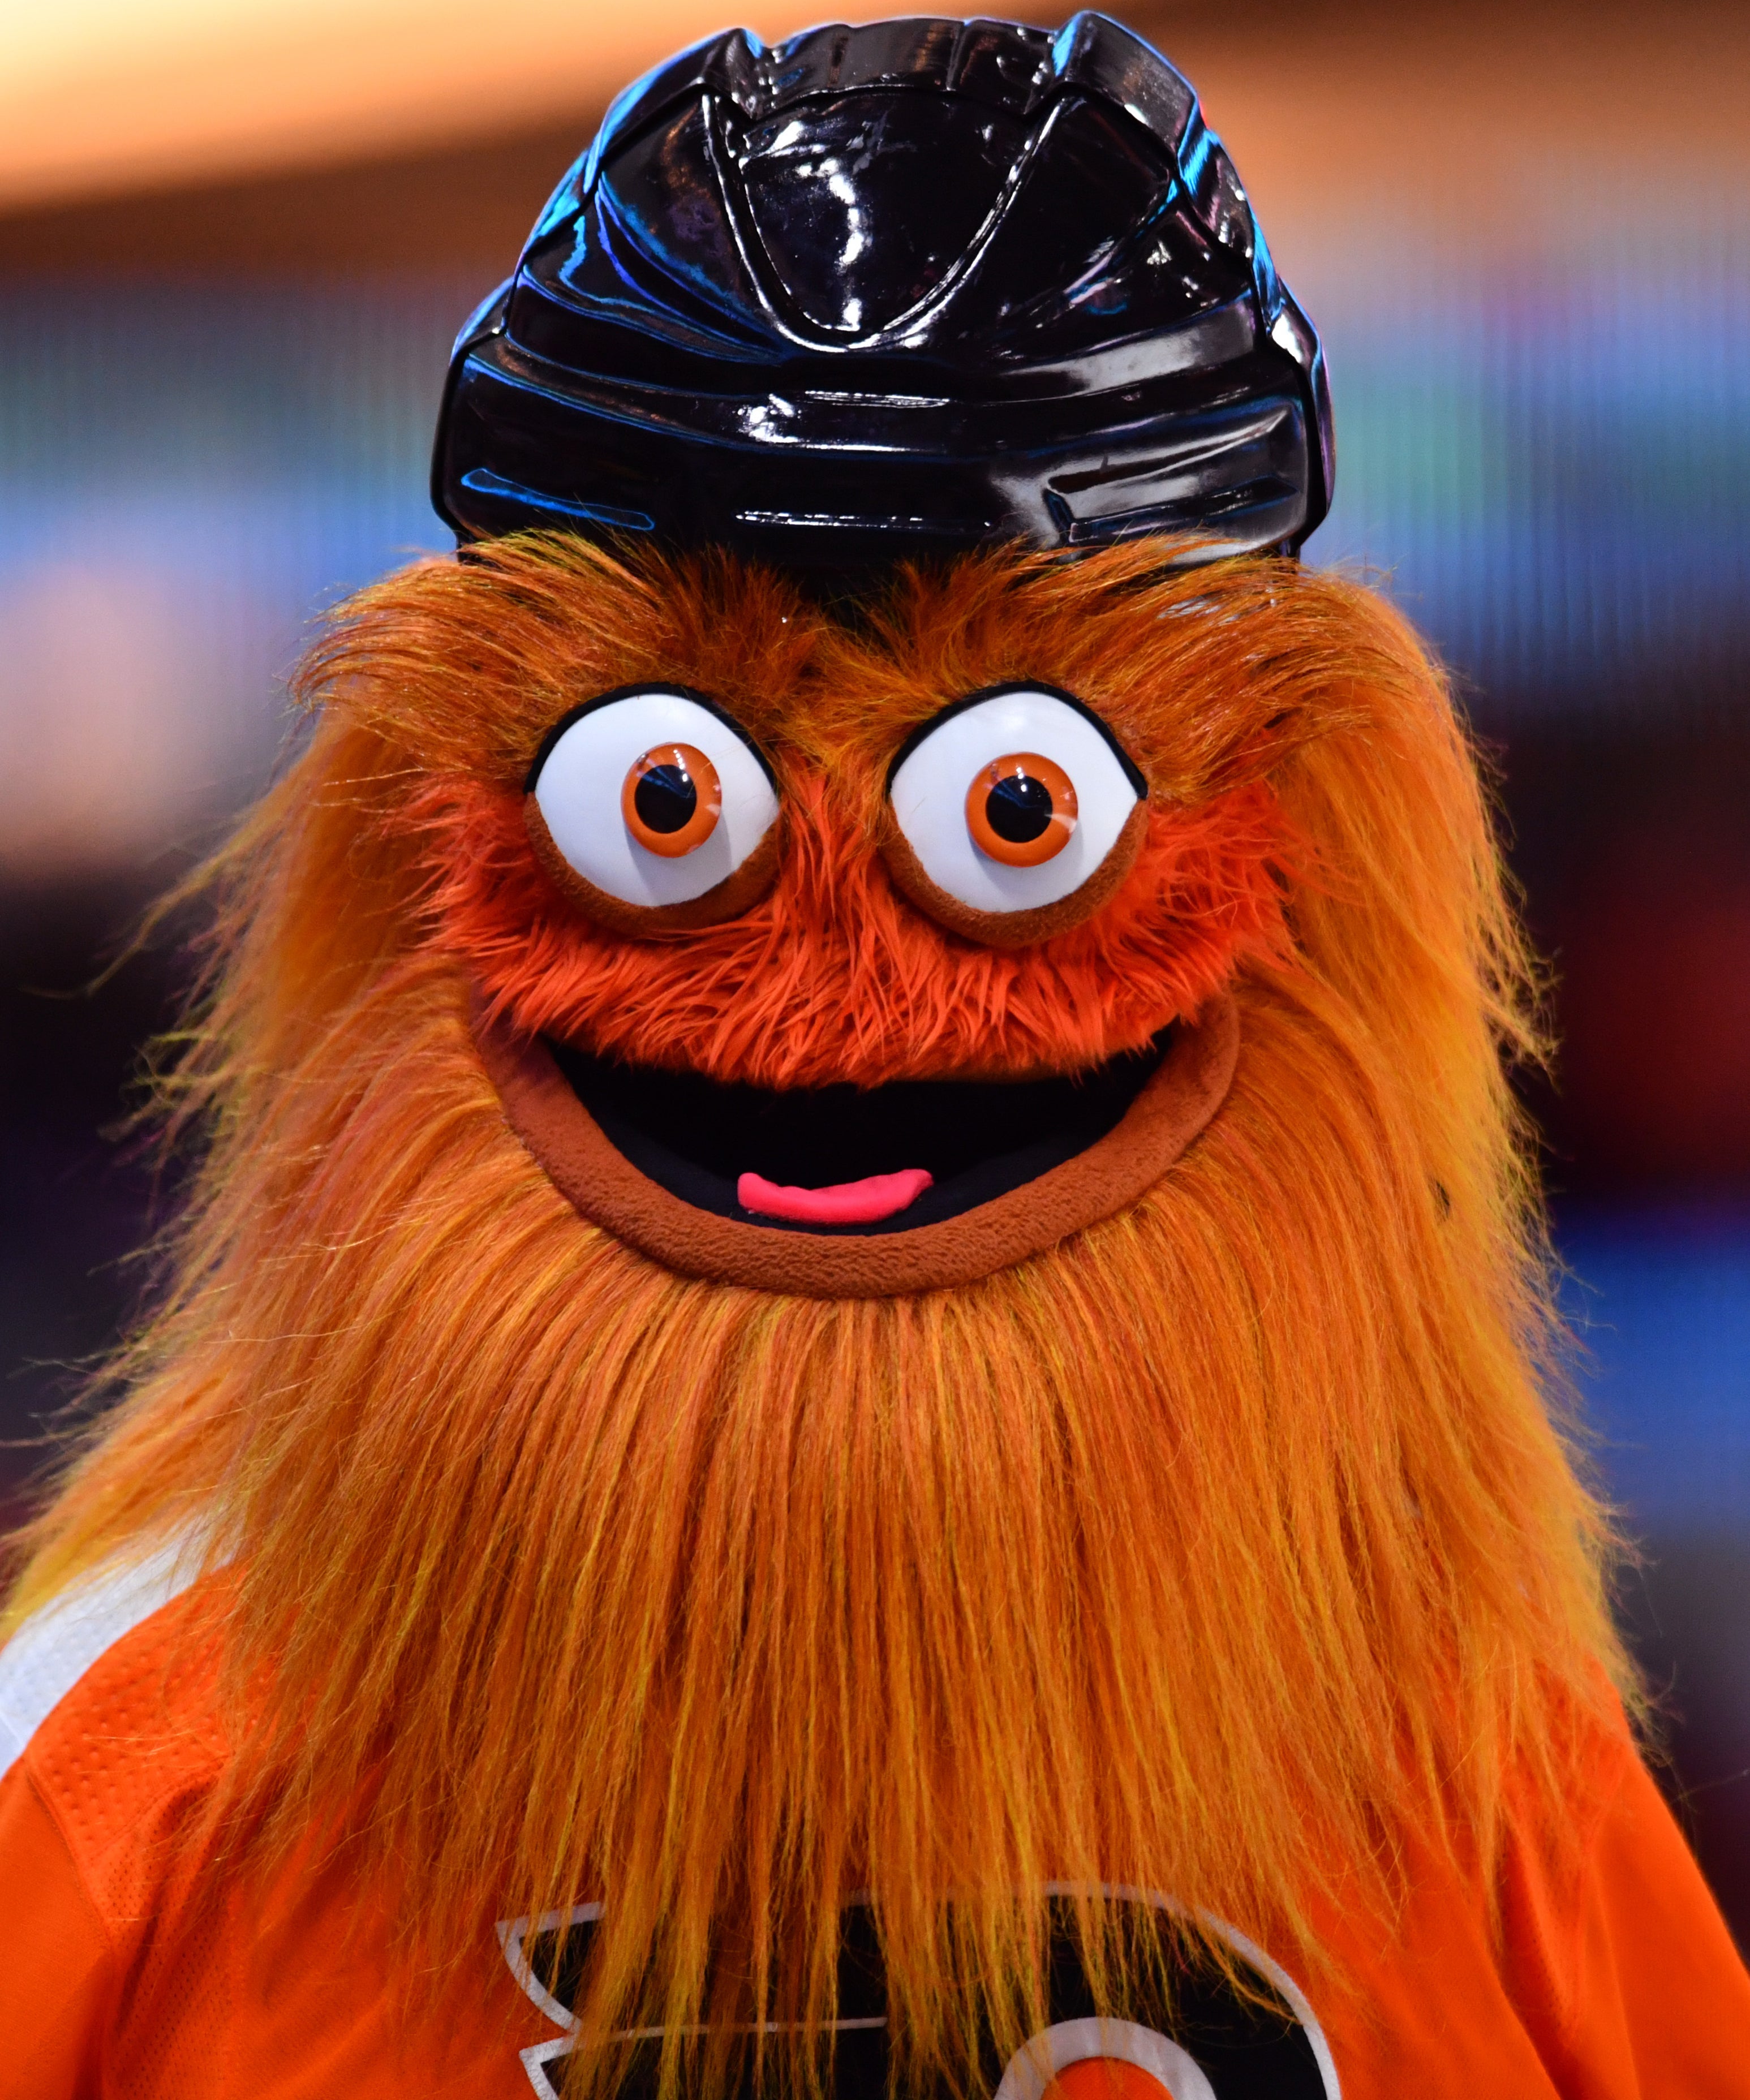 From mascot to meme to megastar - How Gritty took over the world - ESPN